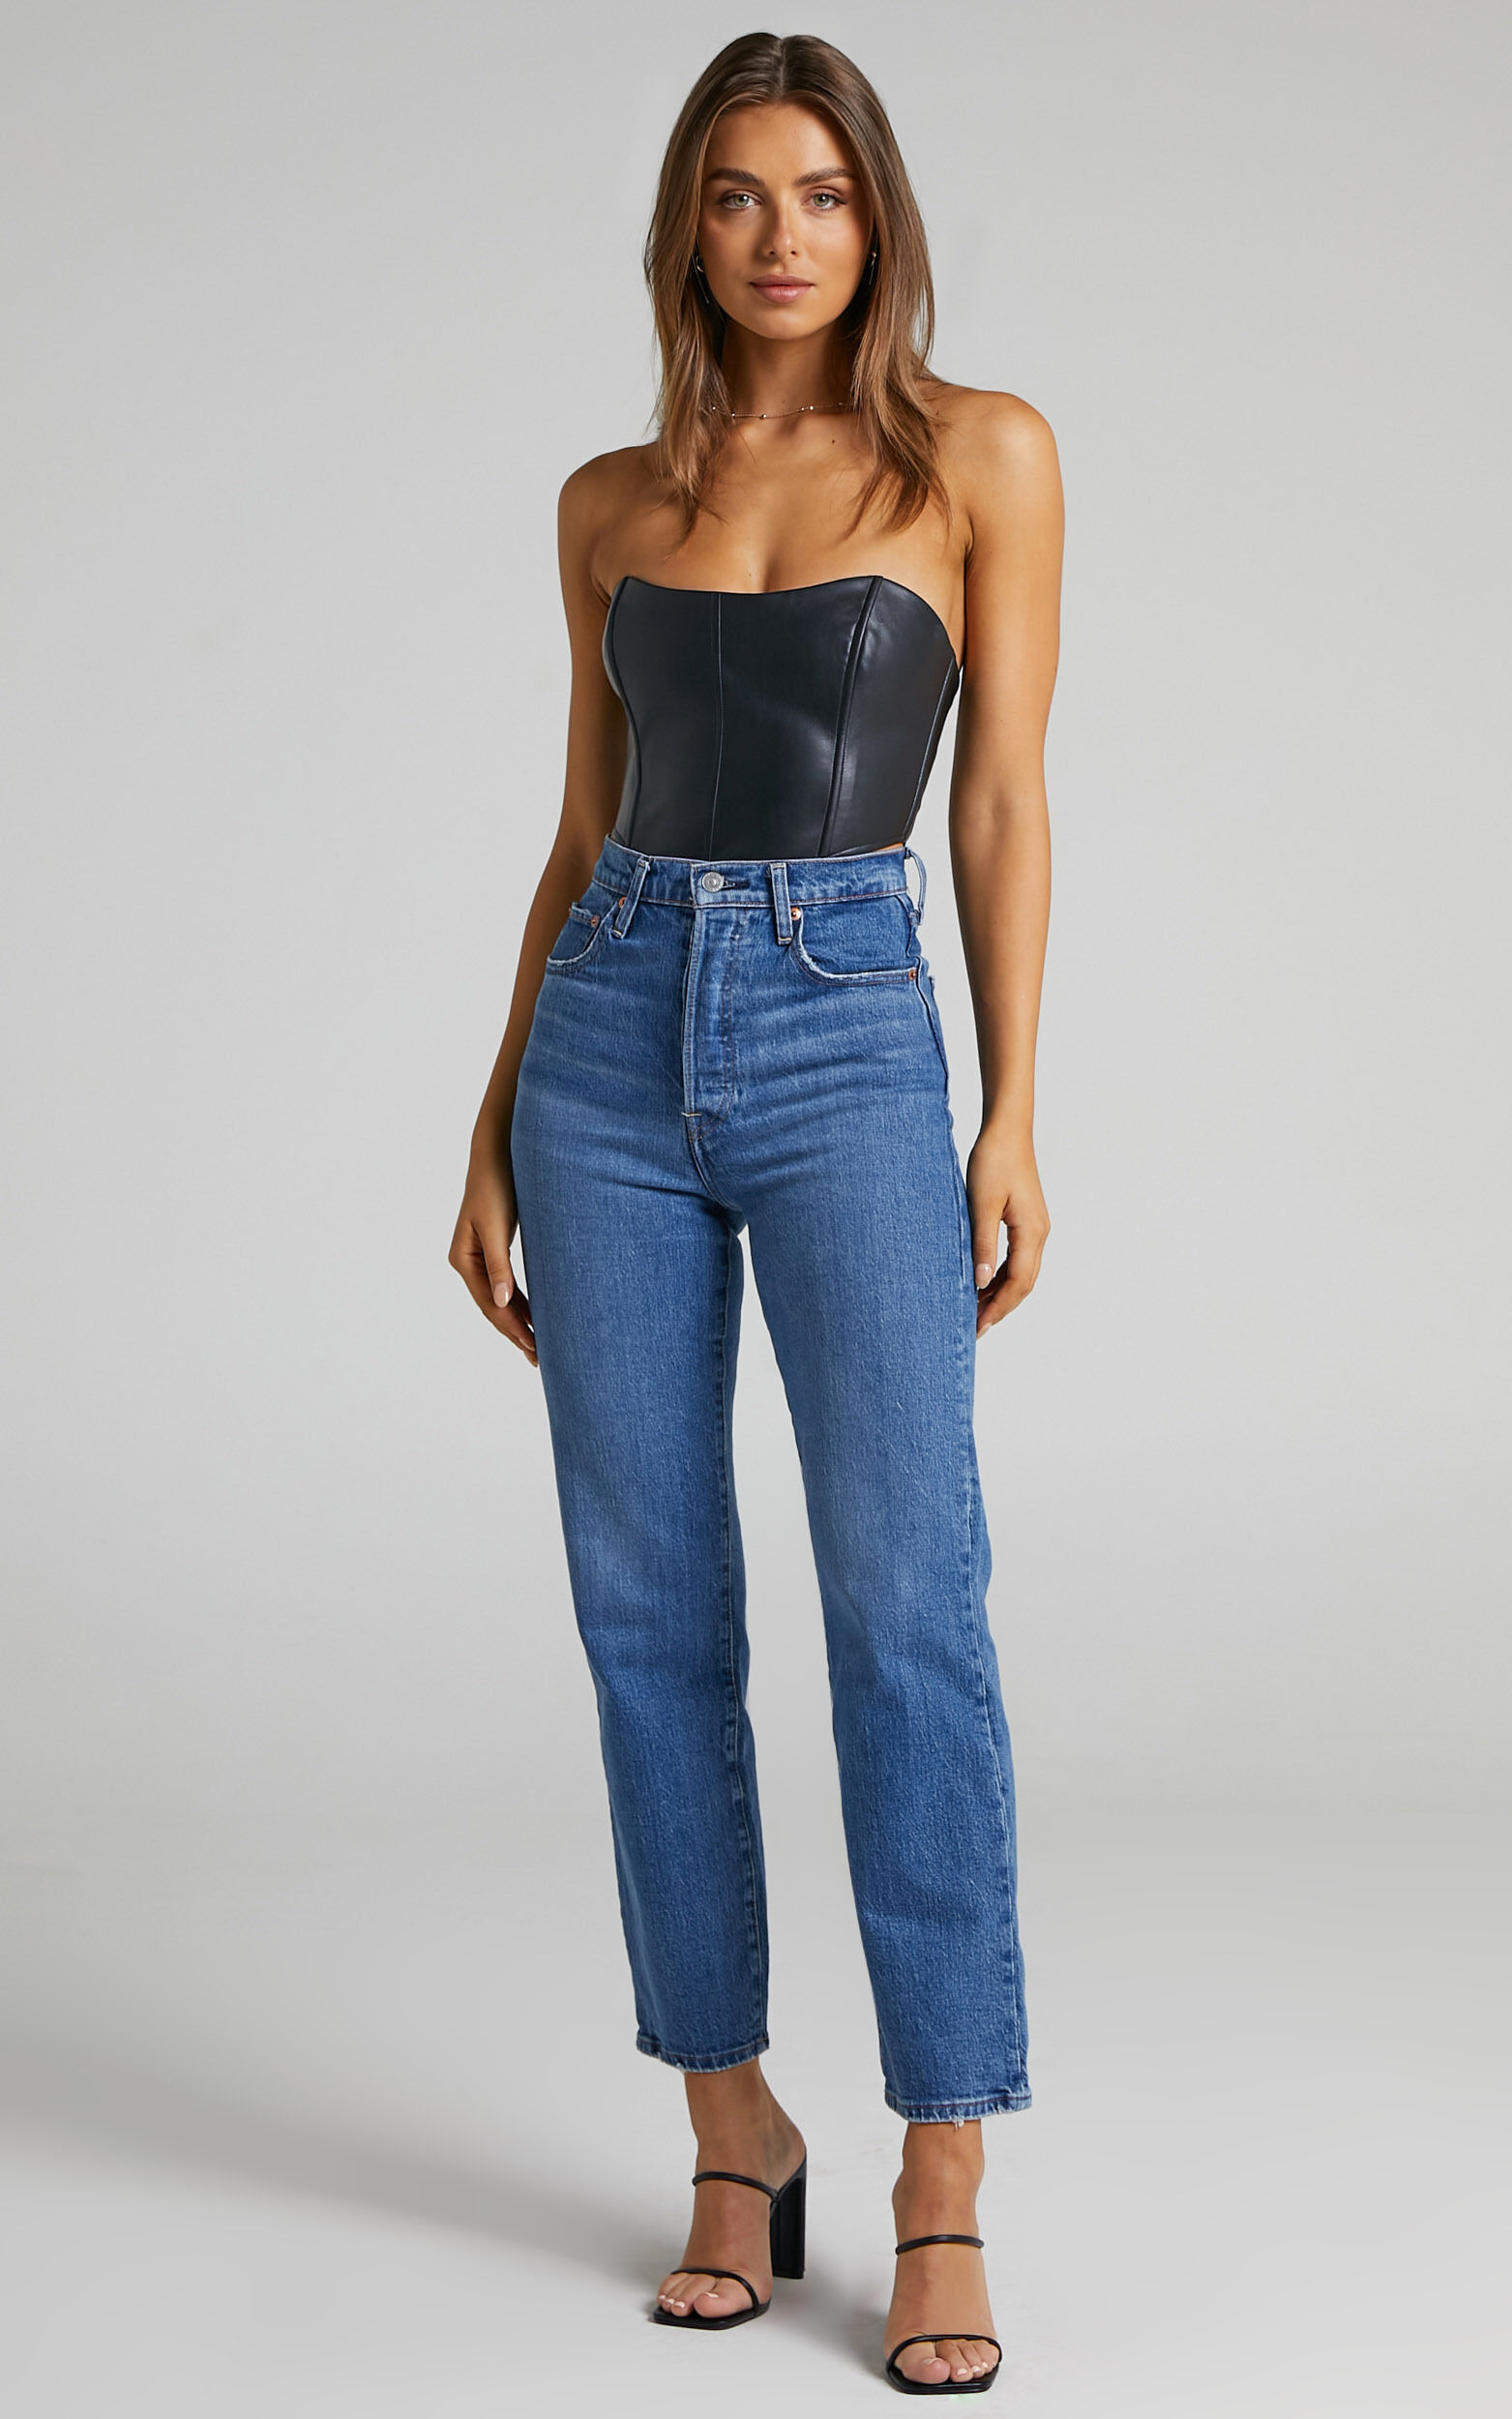 Levi's - High Waisted Ribcage Ankle Jeans in Jazz Jive Together | Showpo